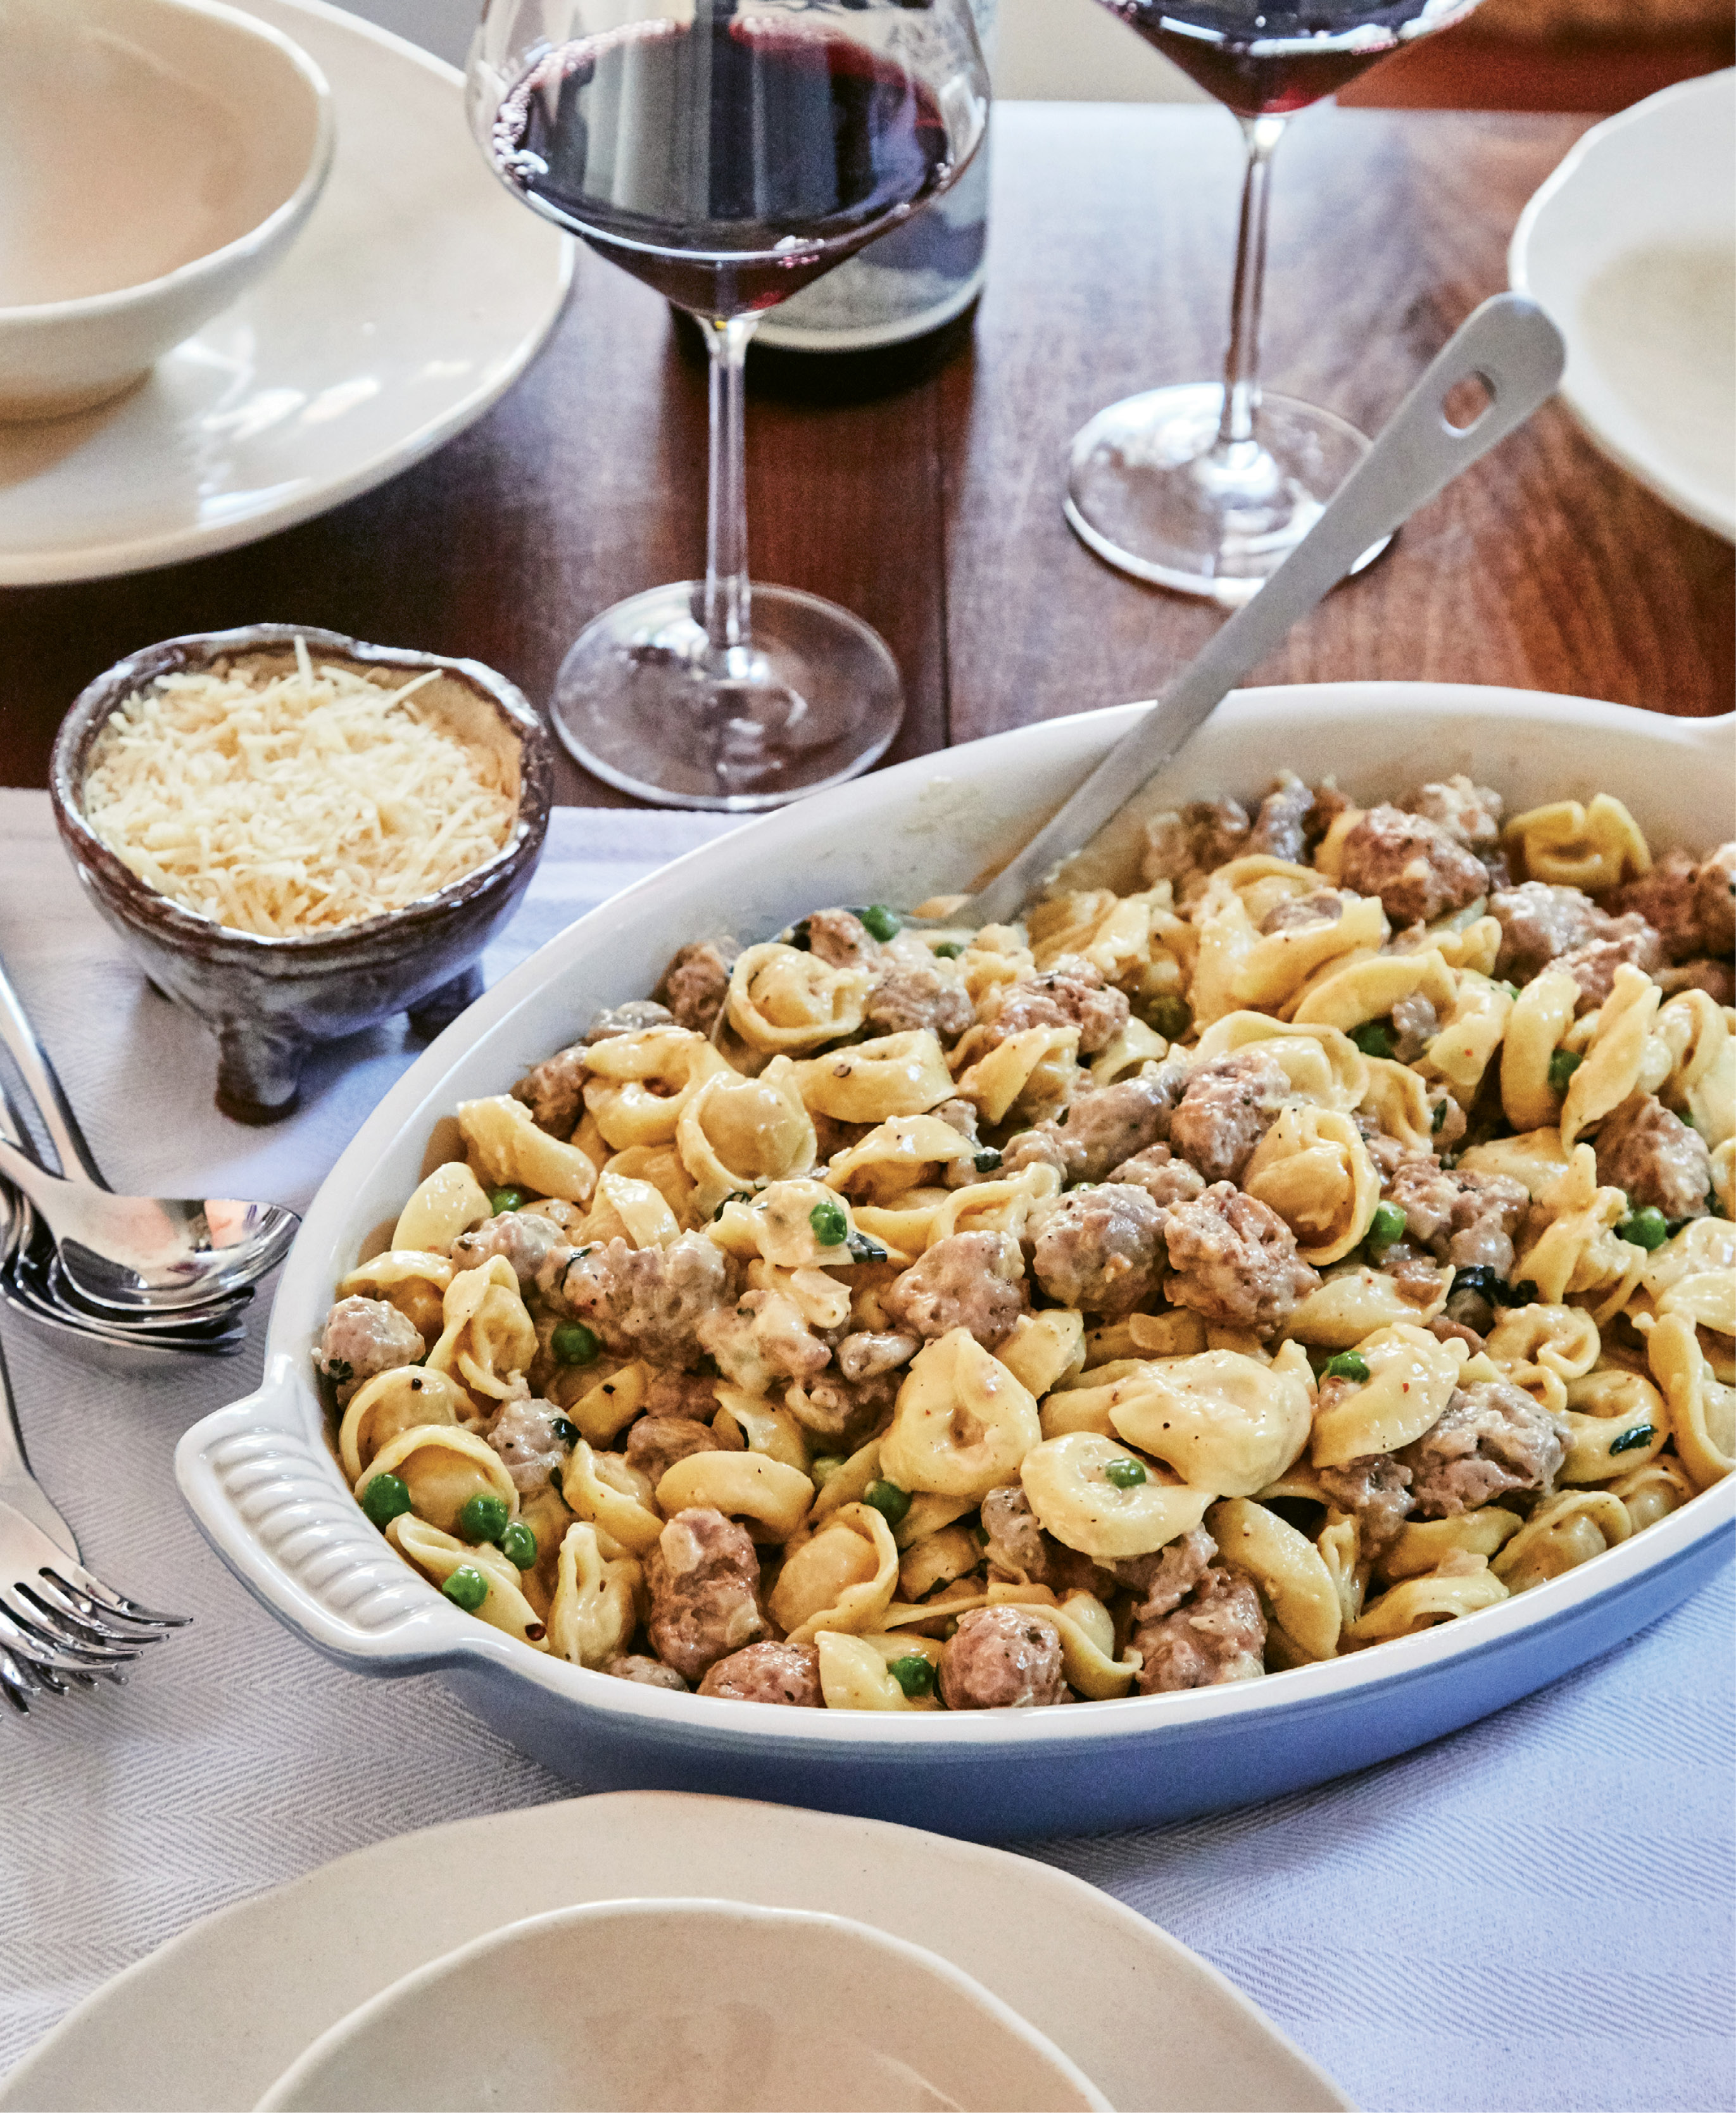 This robust sausage-and-tortellini recipe, passed down from Gillian’s grandmother and mother, is a favorite of her Italian relatives, who take comfort in the dish when the weather turns cold and gray.